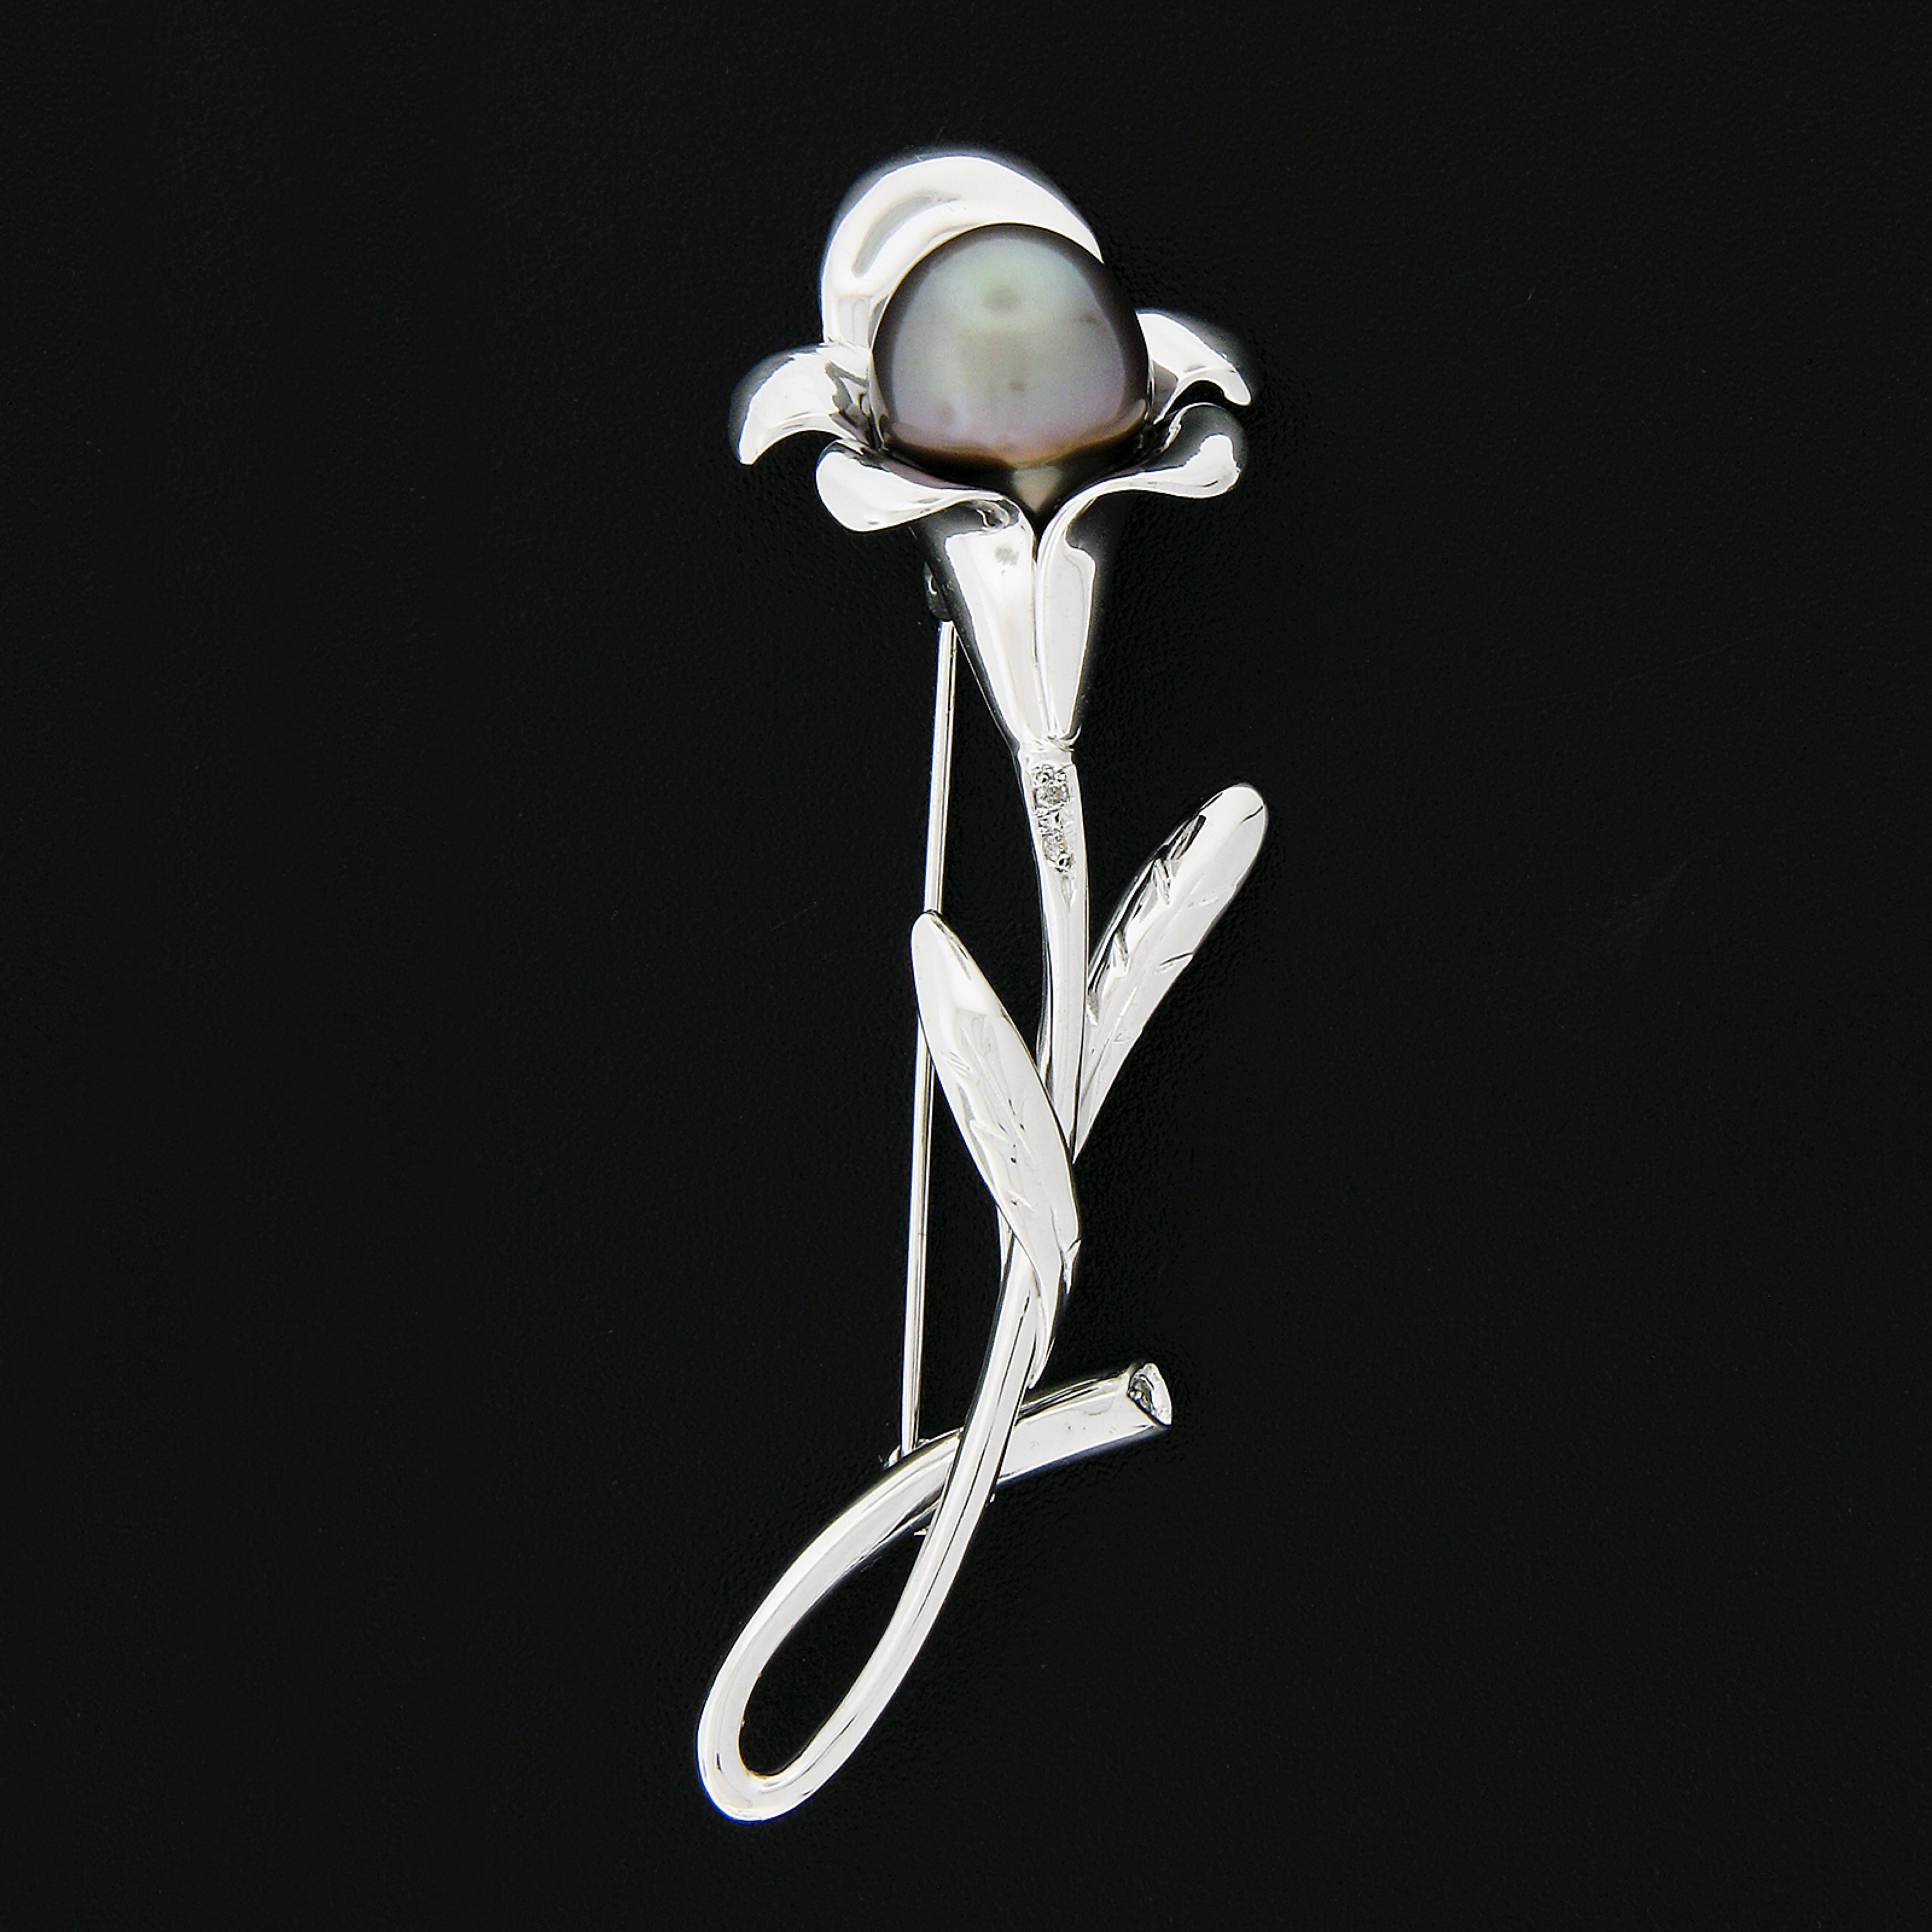 Here we have a wonderful pin/brooch that was crafted from solid 14k white gold featuring a beautiful flower design. Neatly set in the center is a fine Tahitian pearl. The round brilliant diamonds are pave set enhancing the brooch with wonderful